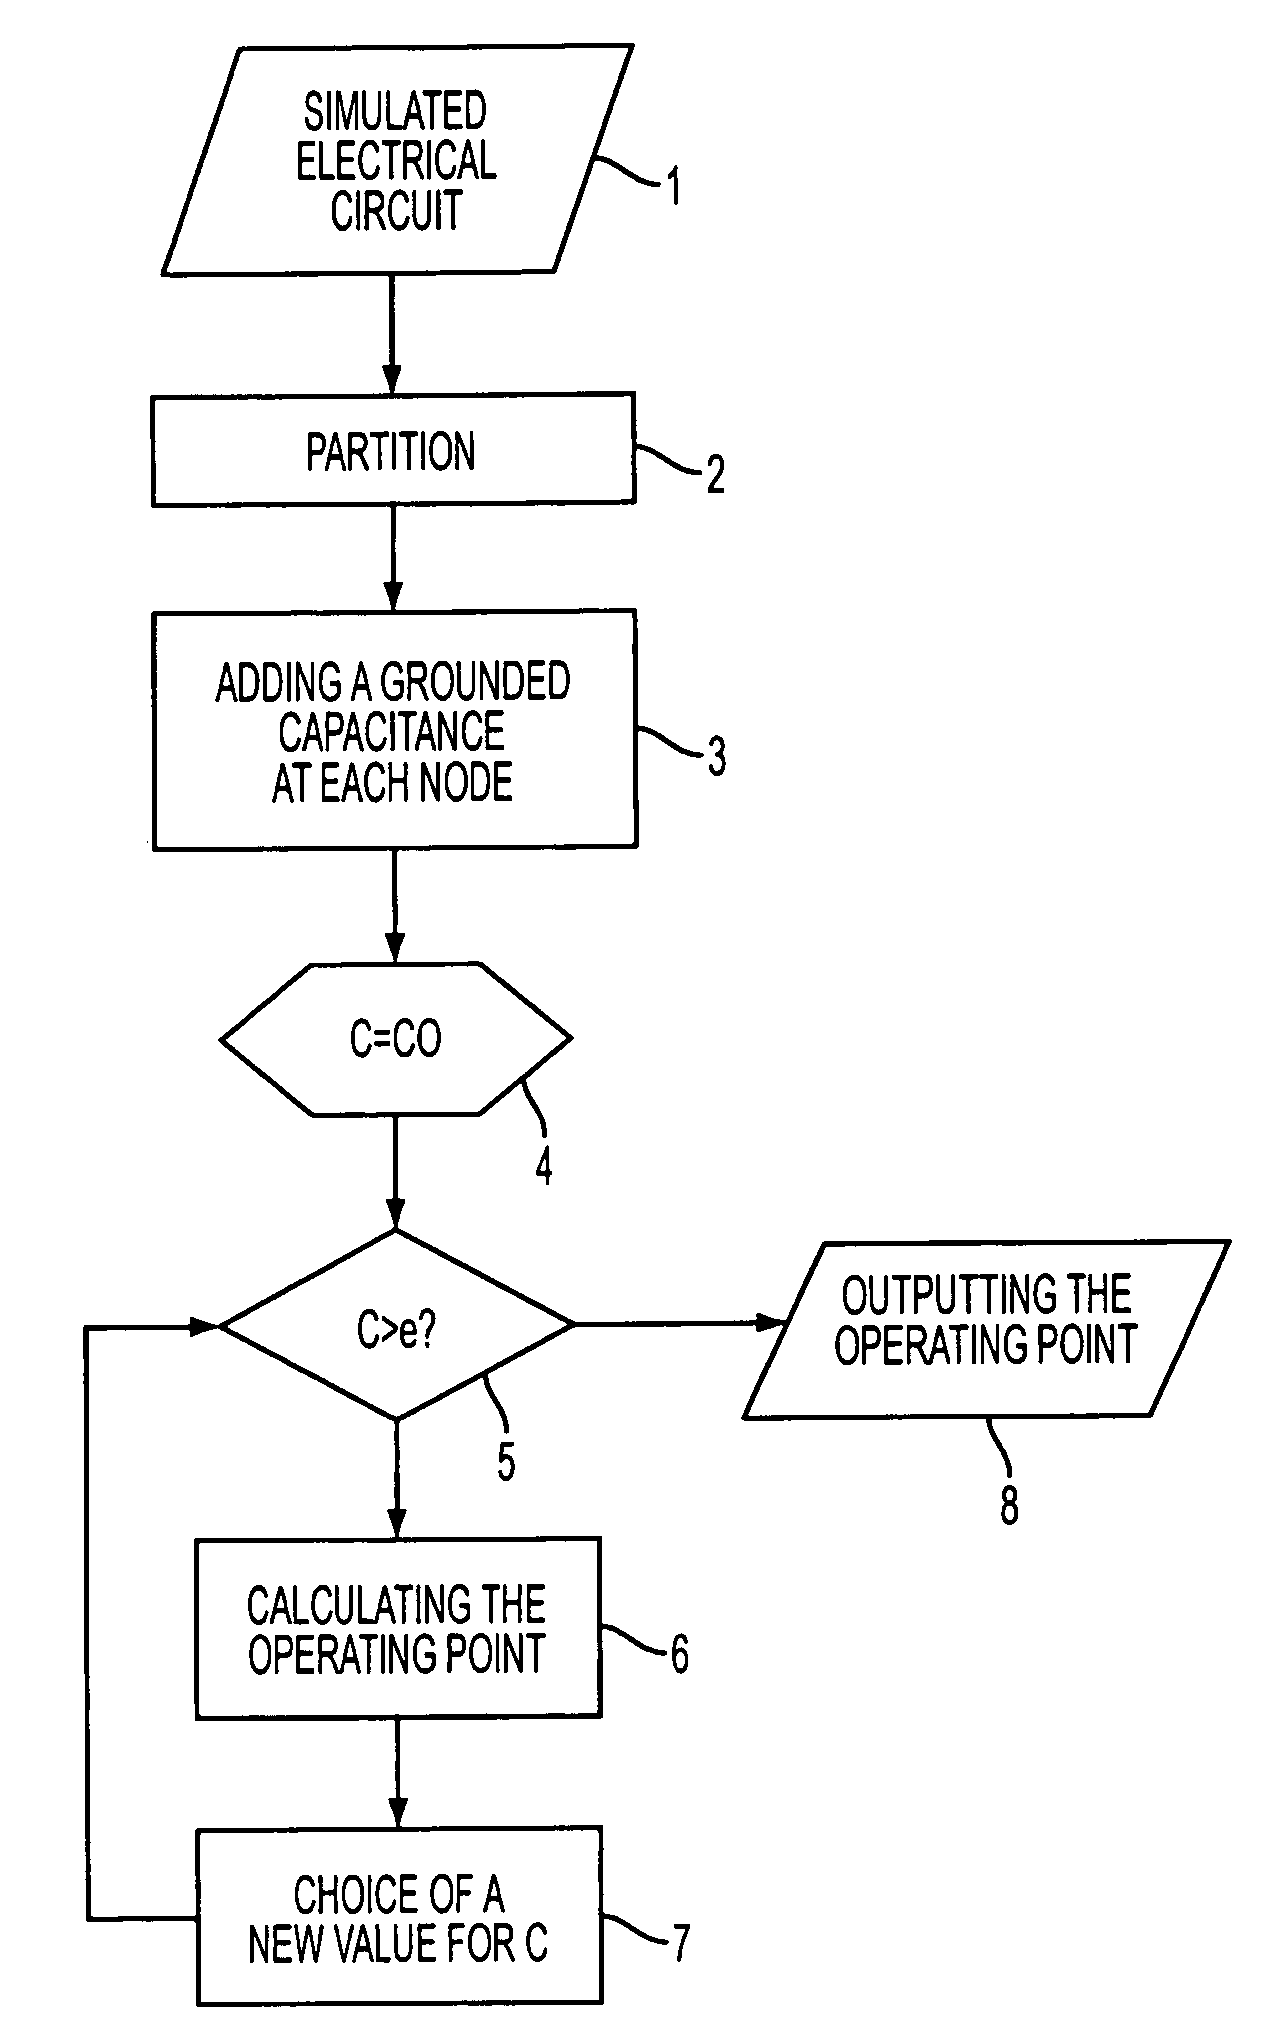 Computer-assisted method for the parallel calculation of the operating point of electric circuits